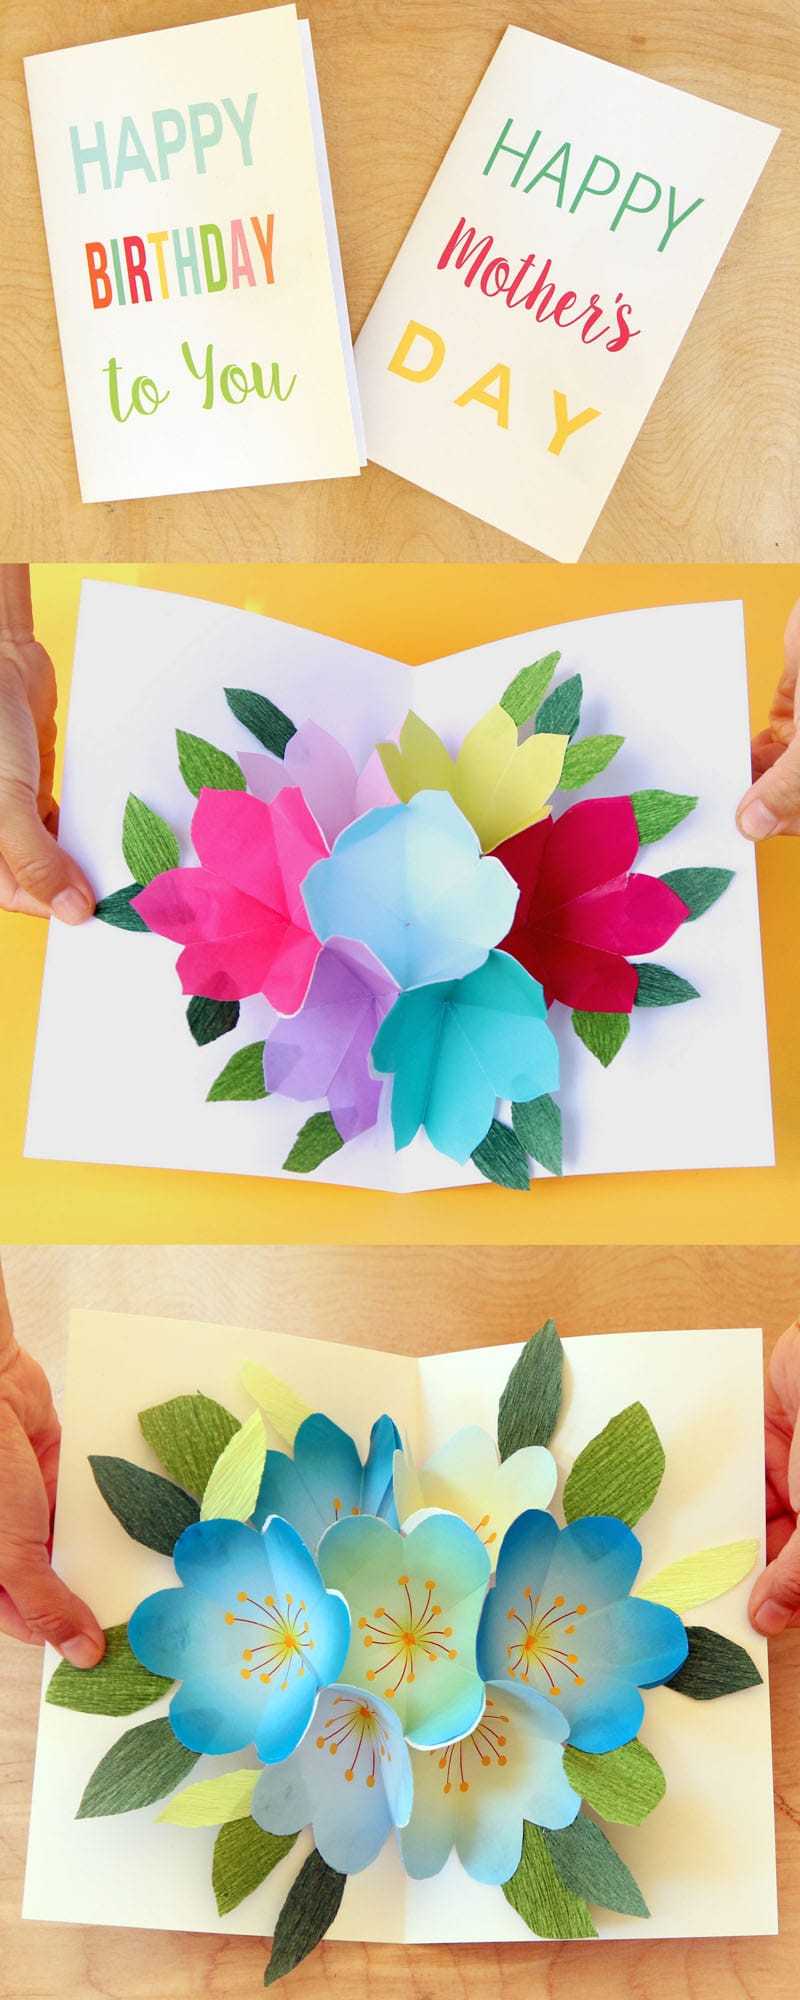 Free Printable Happy Birthday Card With Pop Up Bouquet – A Within Pop Up Card Templates Free Printable